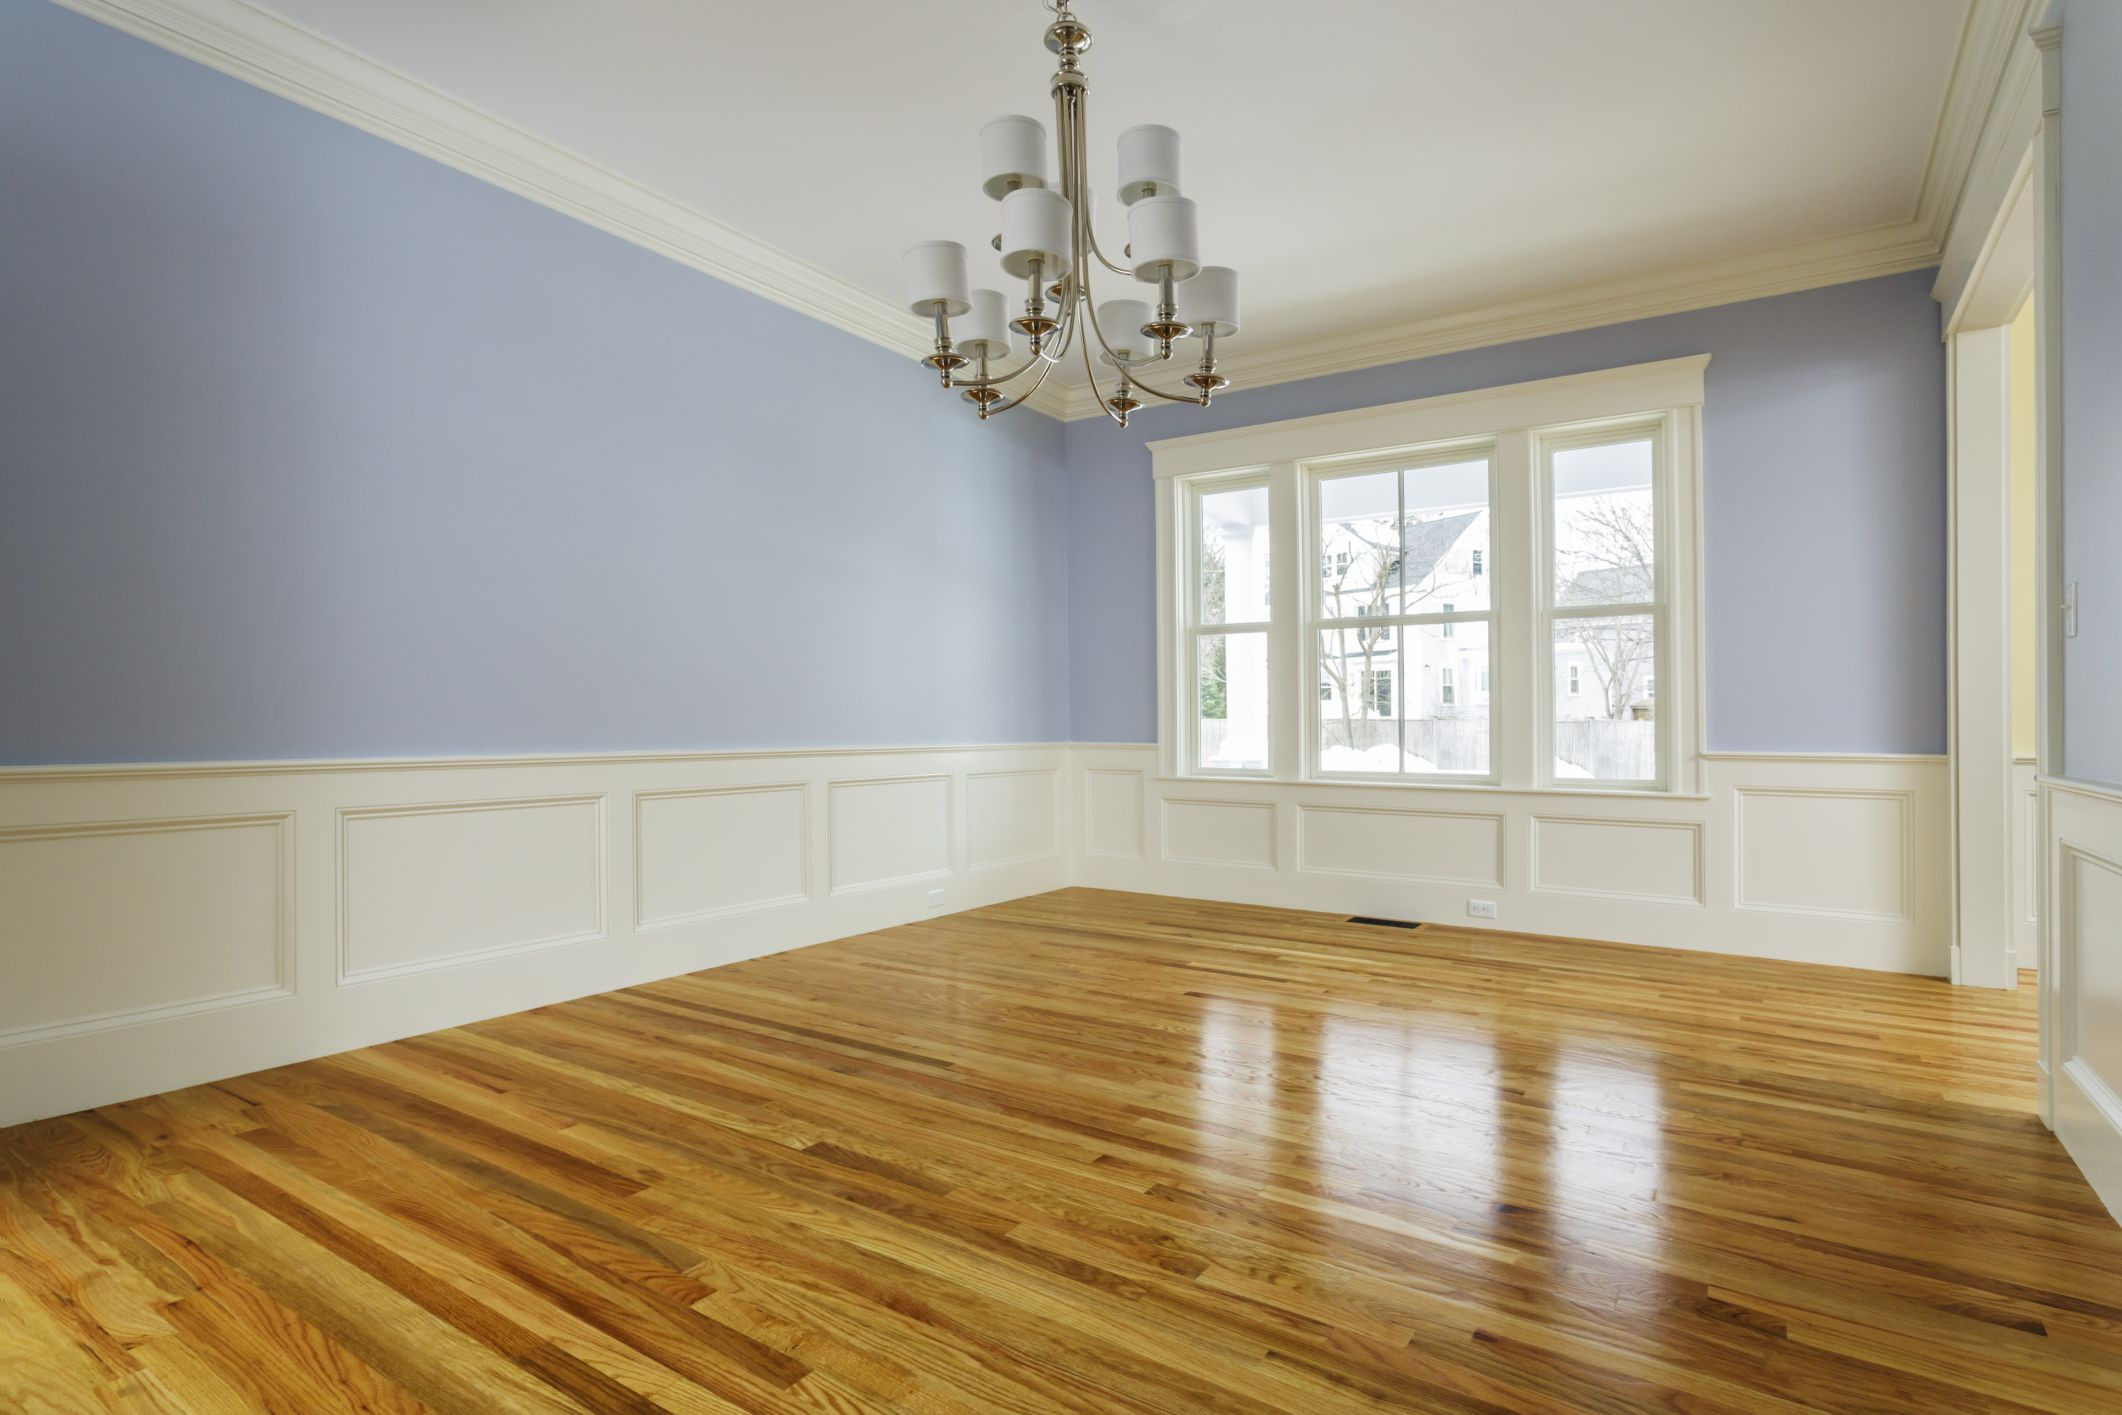 25 Nice How Much Does Restaining Hardwood Floors Cost 2022 free download how much does restaining hardwood floors cost of the cost to refinish hardwood floors intended for 168686572 highres 56a2fd773df78cf7727b6cb3